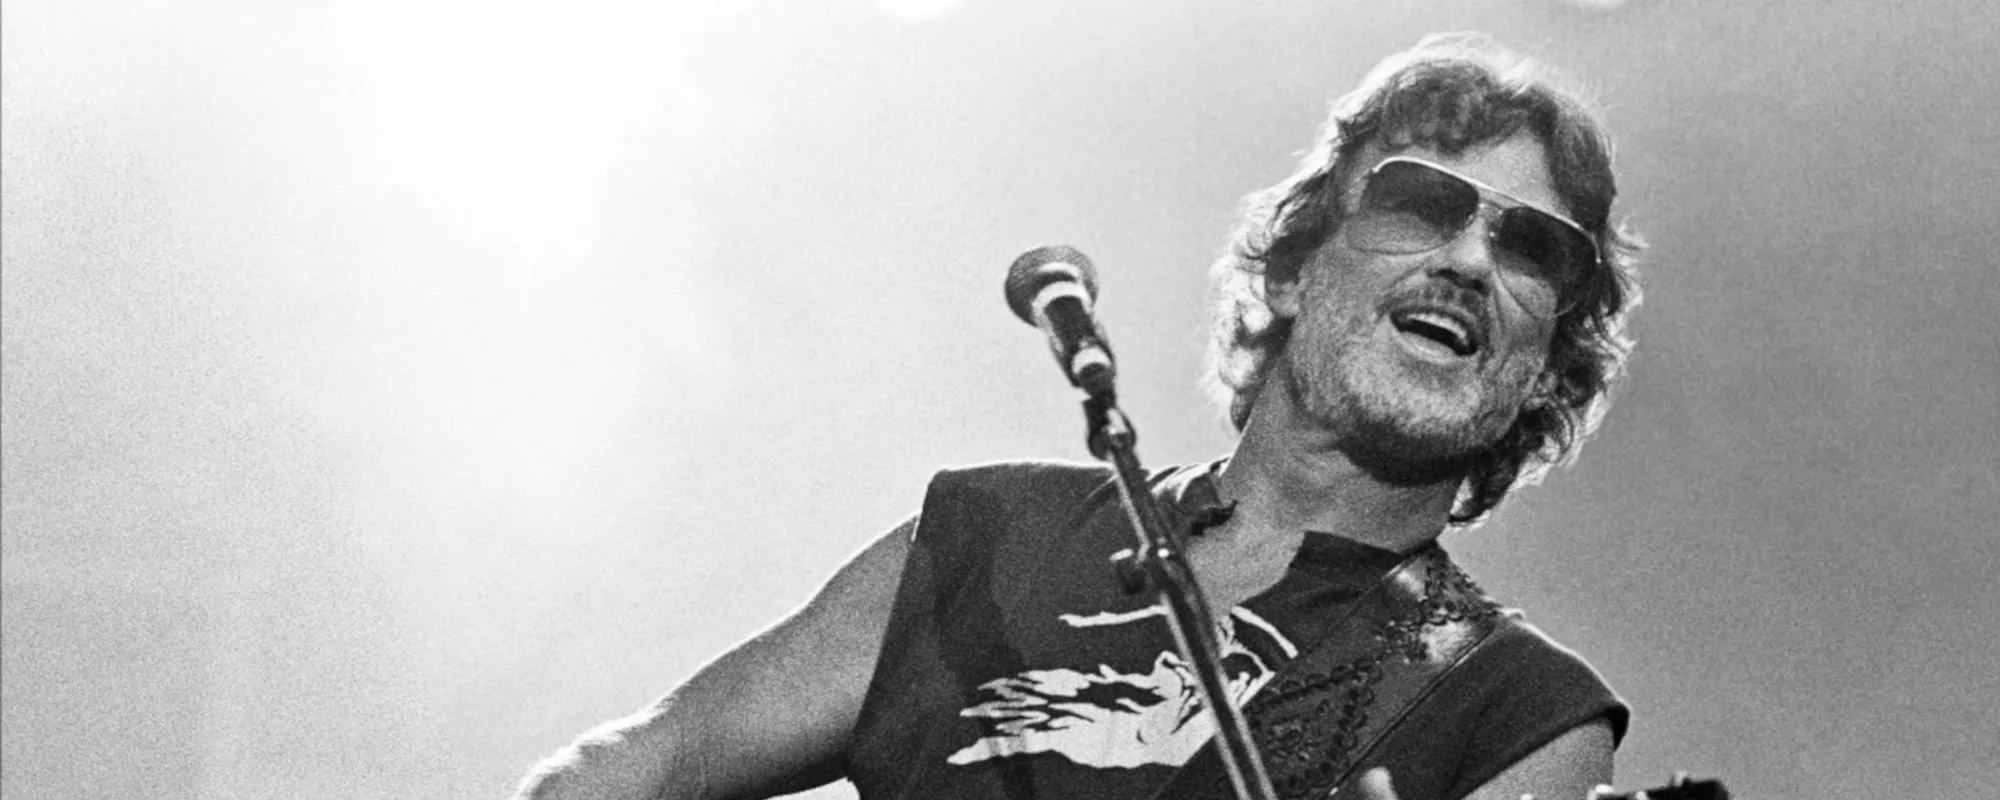 5 Songs You Didn’t Know Kris Kristofferson Wrote for Other Artists, First